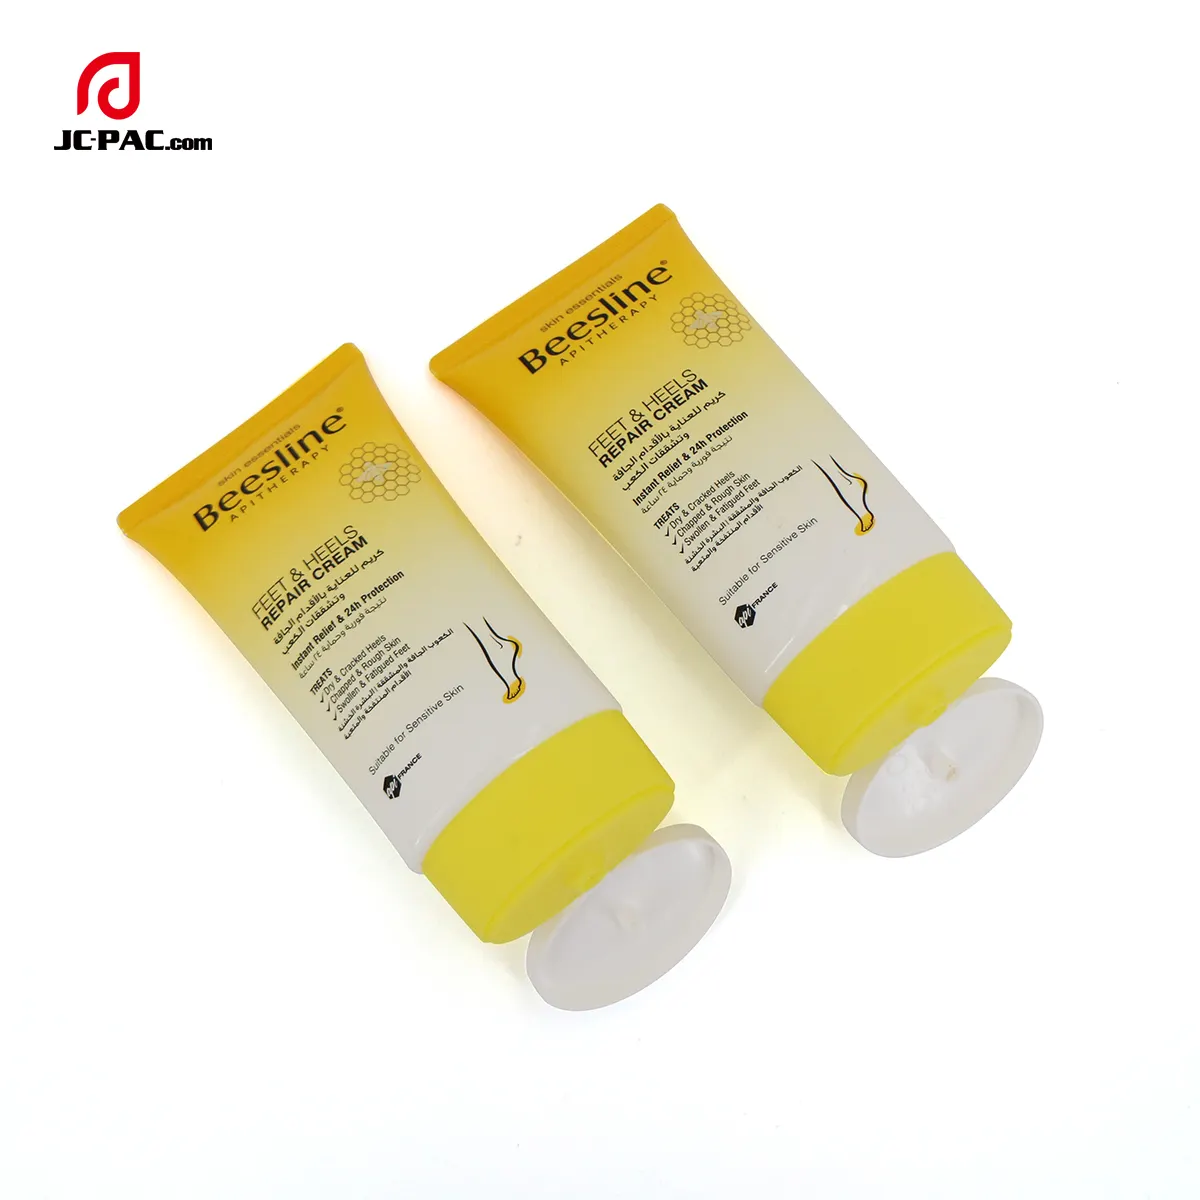 Recyclable Oval Soft Tube With Flip Cap Feet&Heels Repair Cream Cosmetics Plastic Tube Packaging